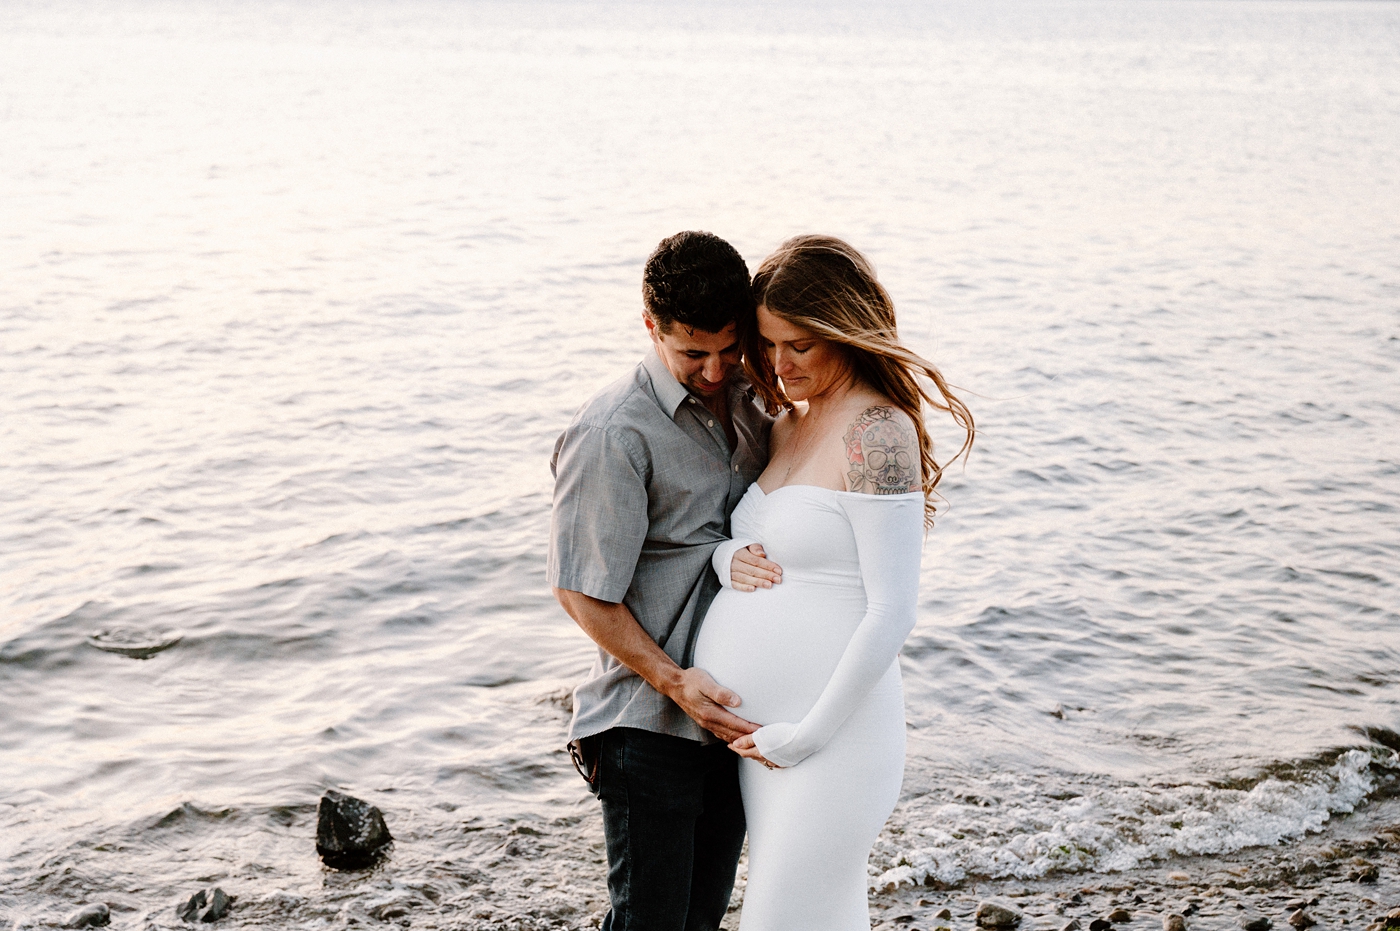 Dad embraces mom's belly in front of Hood Canal. Image by PNW maternity photographer Meg Newton.